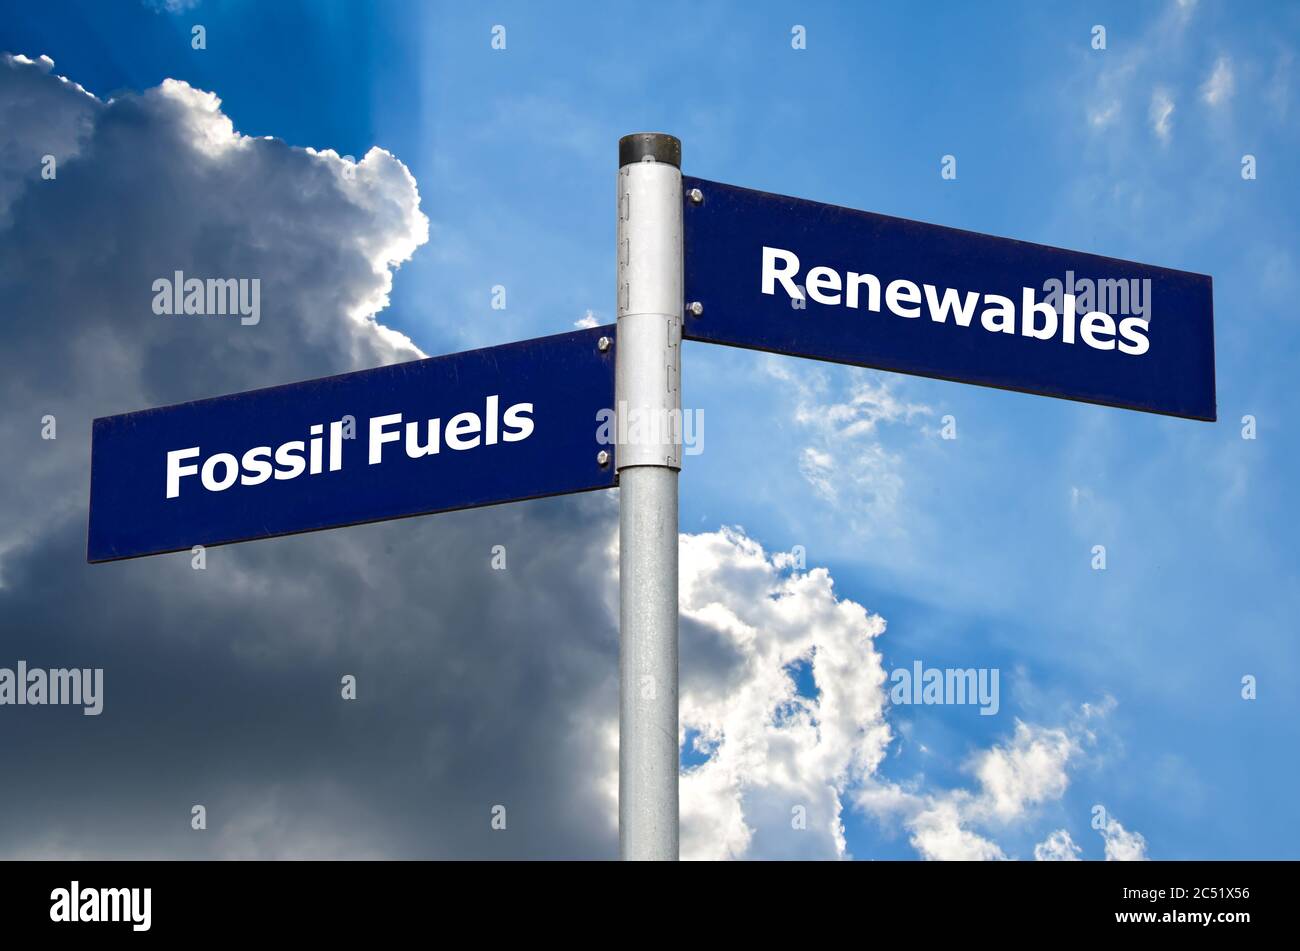 Street sign in front of cloudy sky representing choice between ‘fossil fuels’ and ‘renewables’ Stock Photo